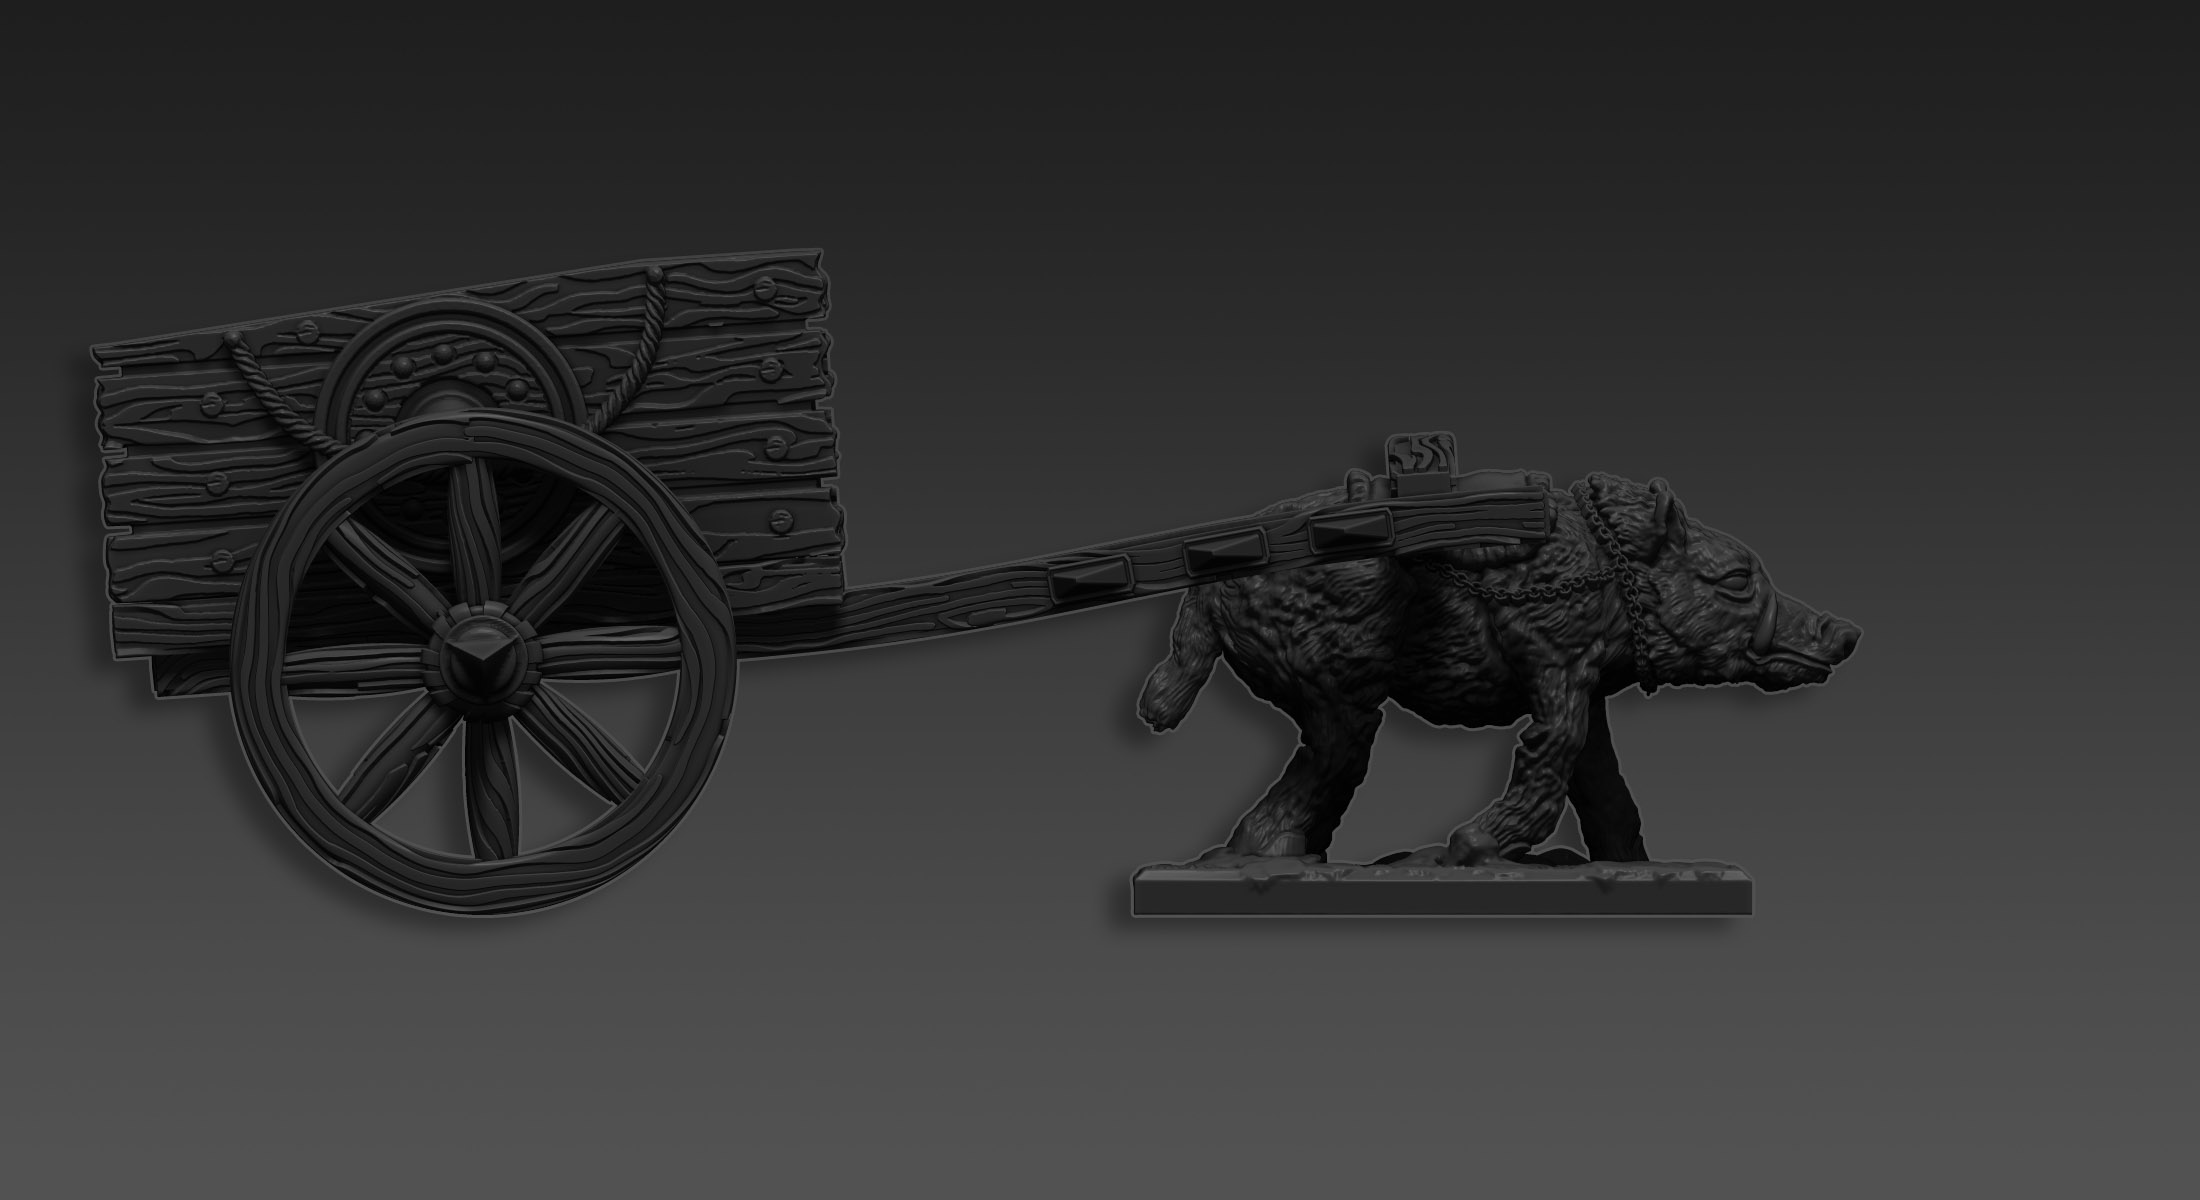  ZBrush 3D Printing Course - Goblin War Chariot